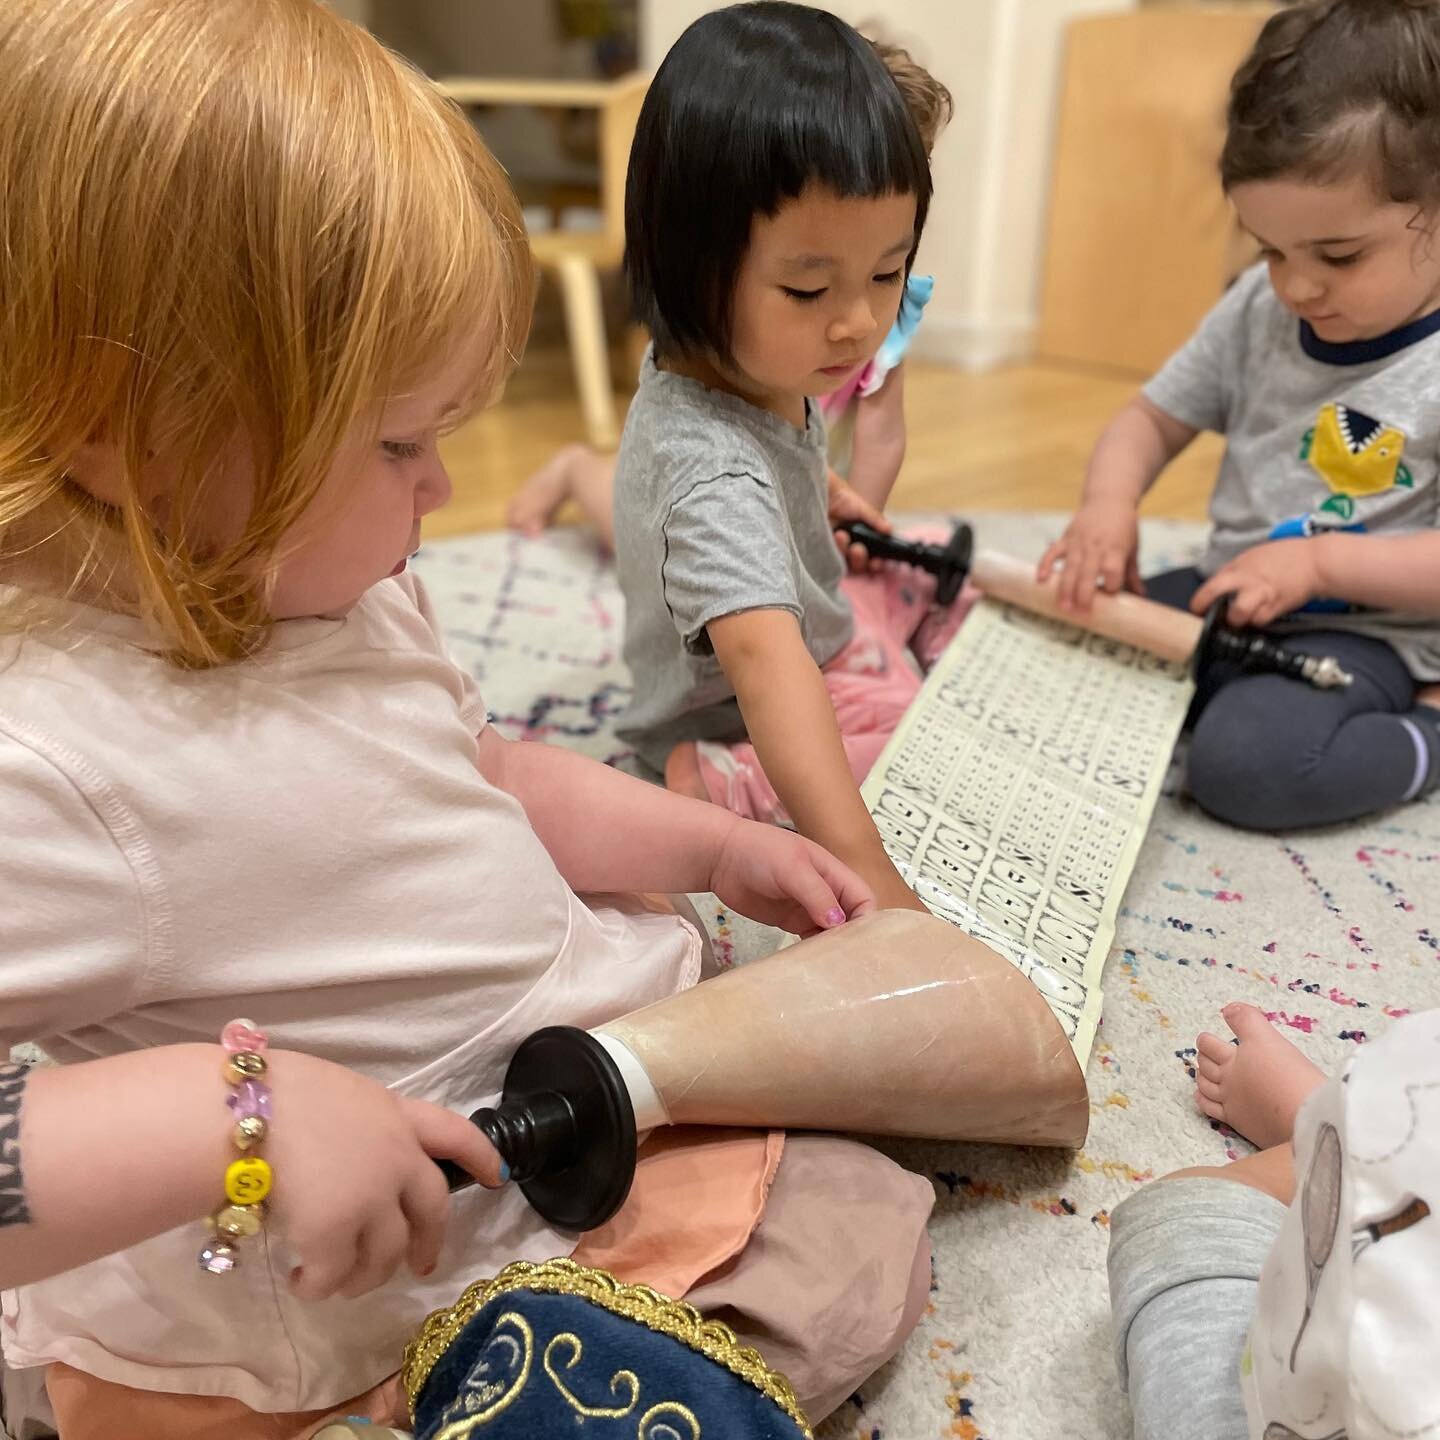 Our campers in the Blossoms class especially love engaging in Jewish learning through Tefillah time every day and our pre-Shabbat celebration each Friday! Here they are exploring a play Torah during open center time. The scroll format makes it an esp